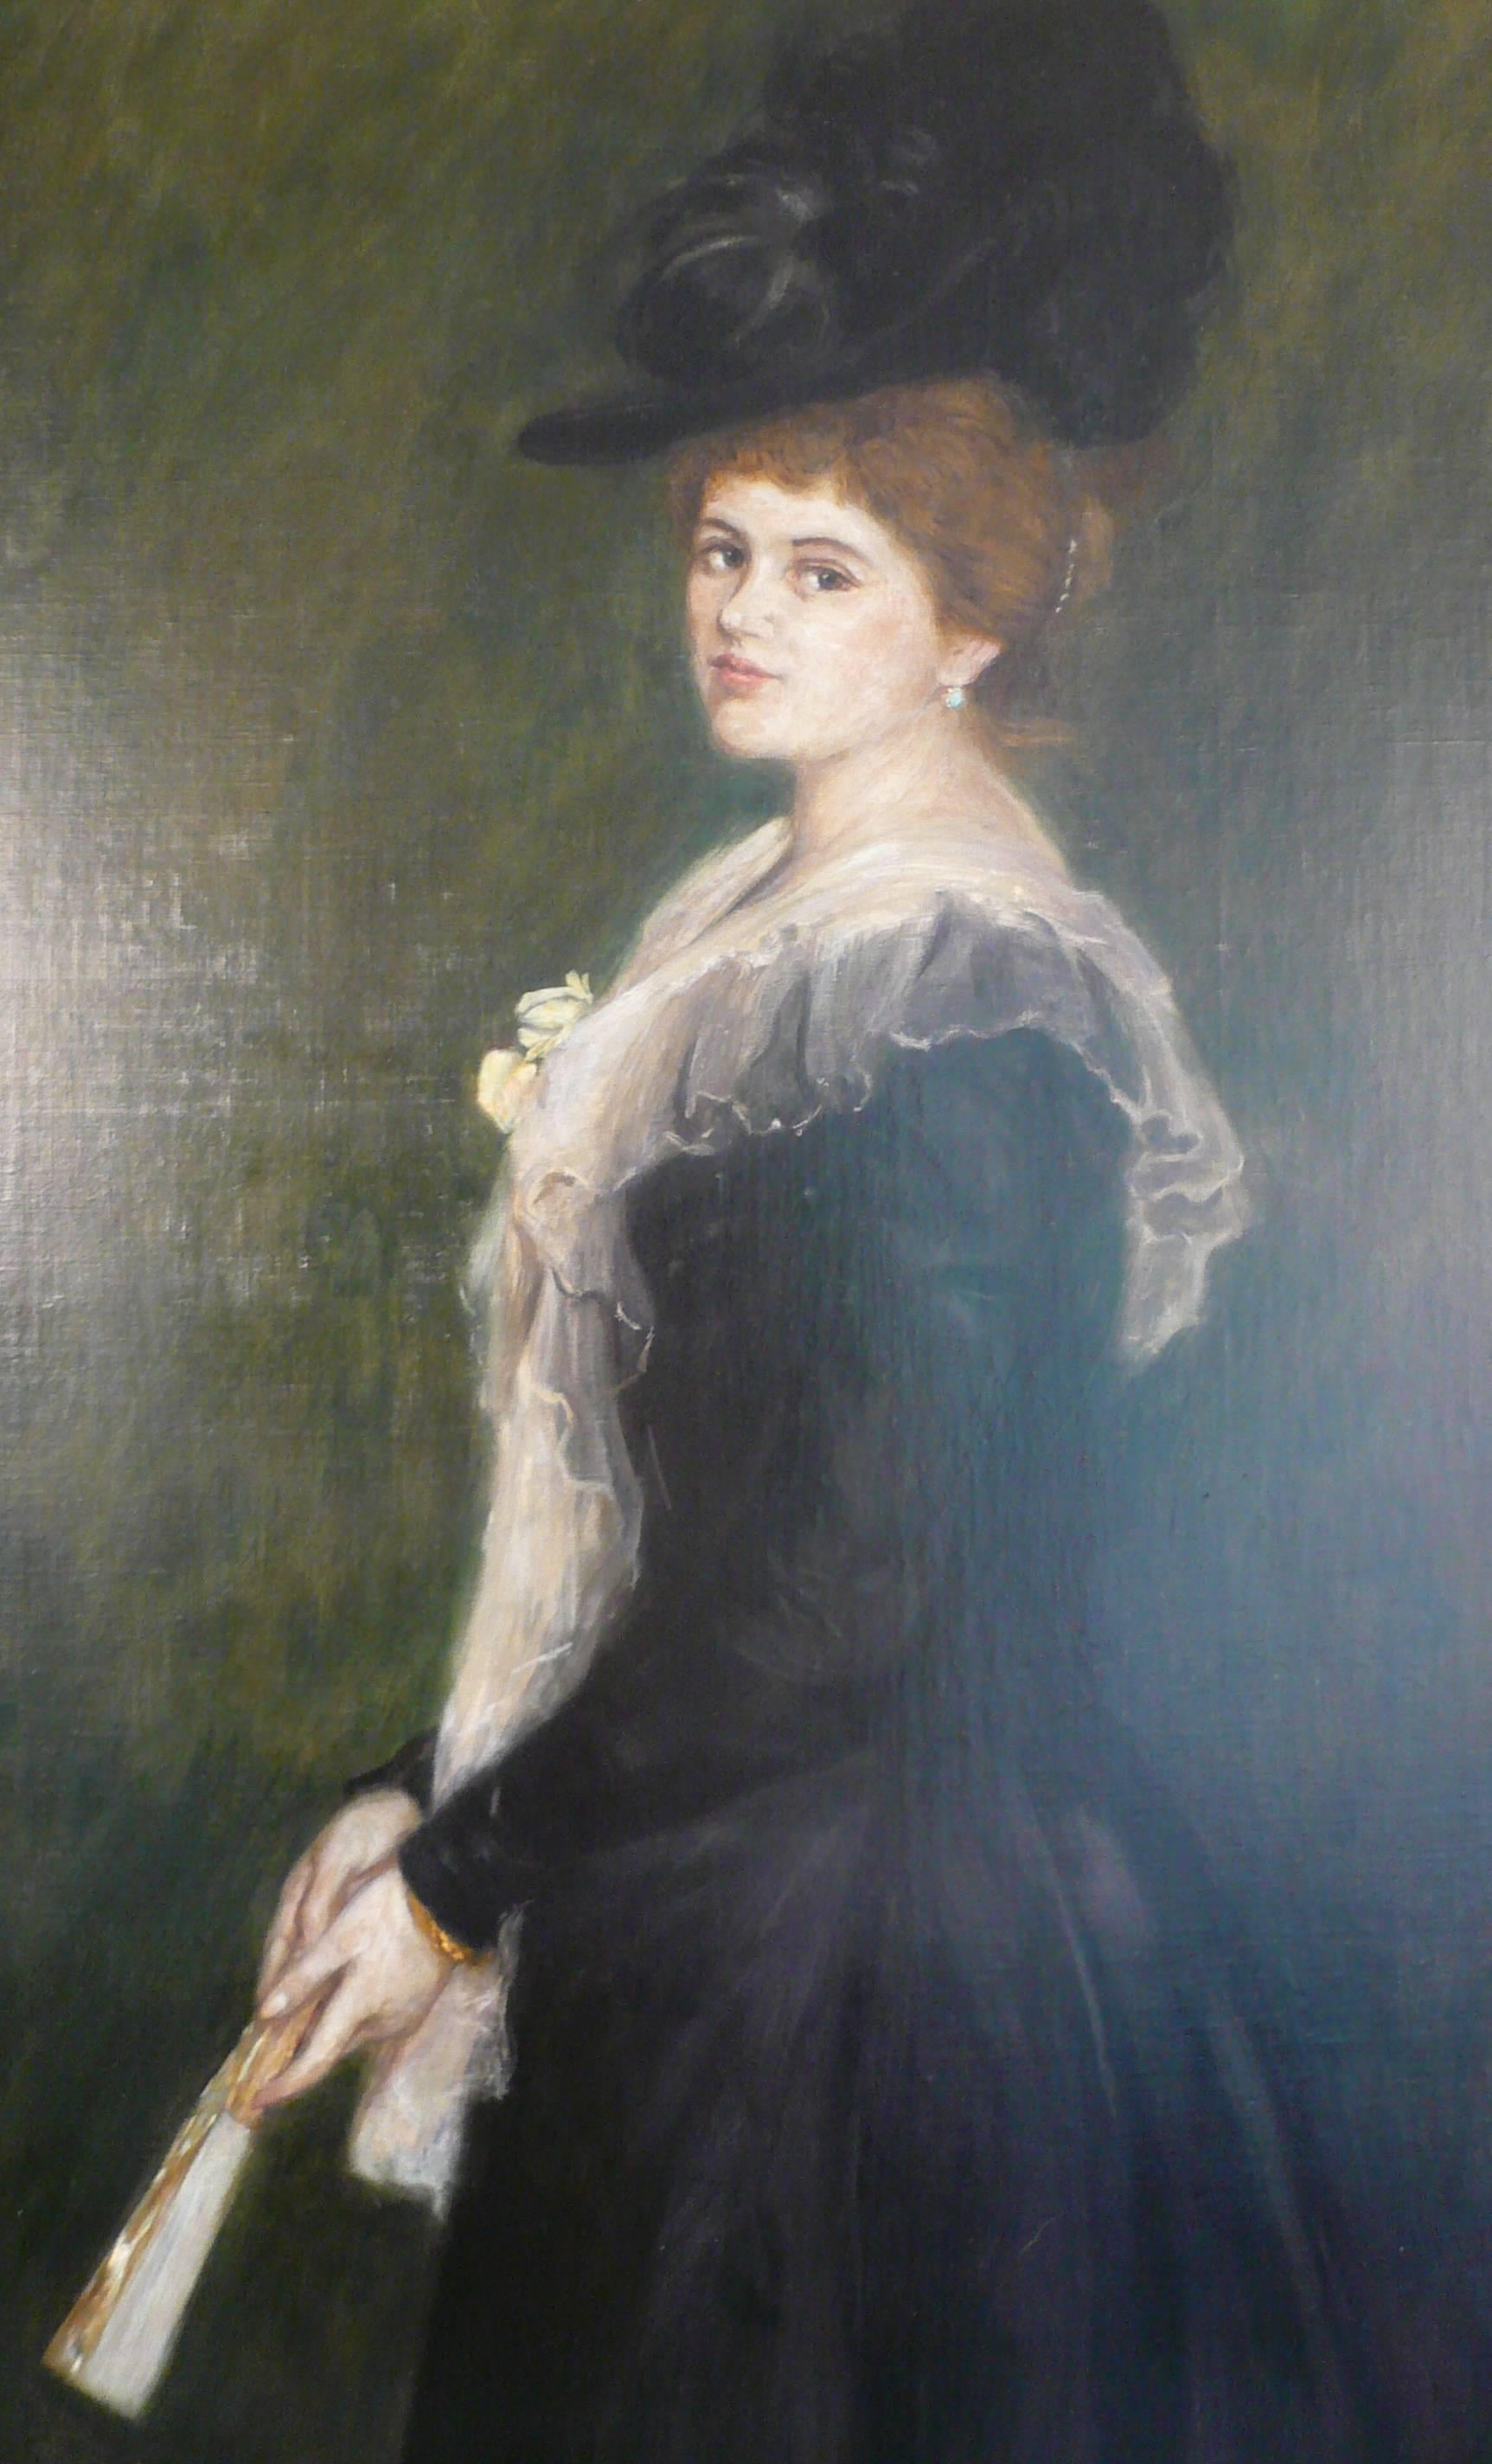 European Gilded Age Portrait of a Lady with Fan, Signed A. Roegels, 1899